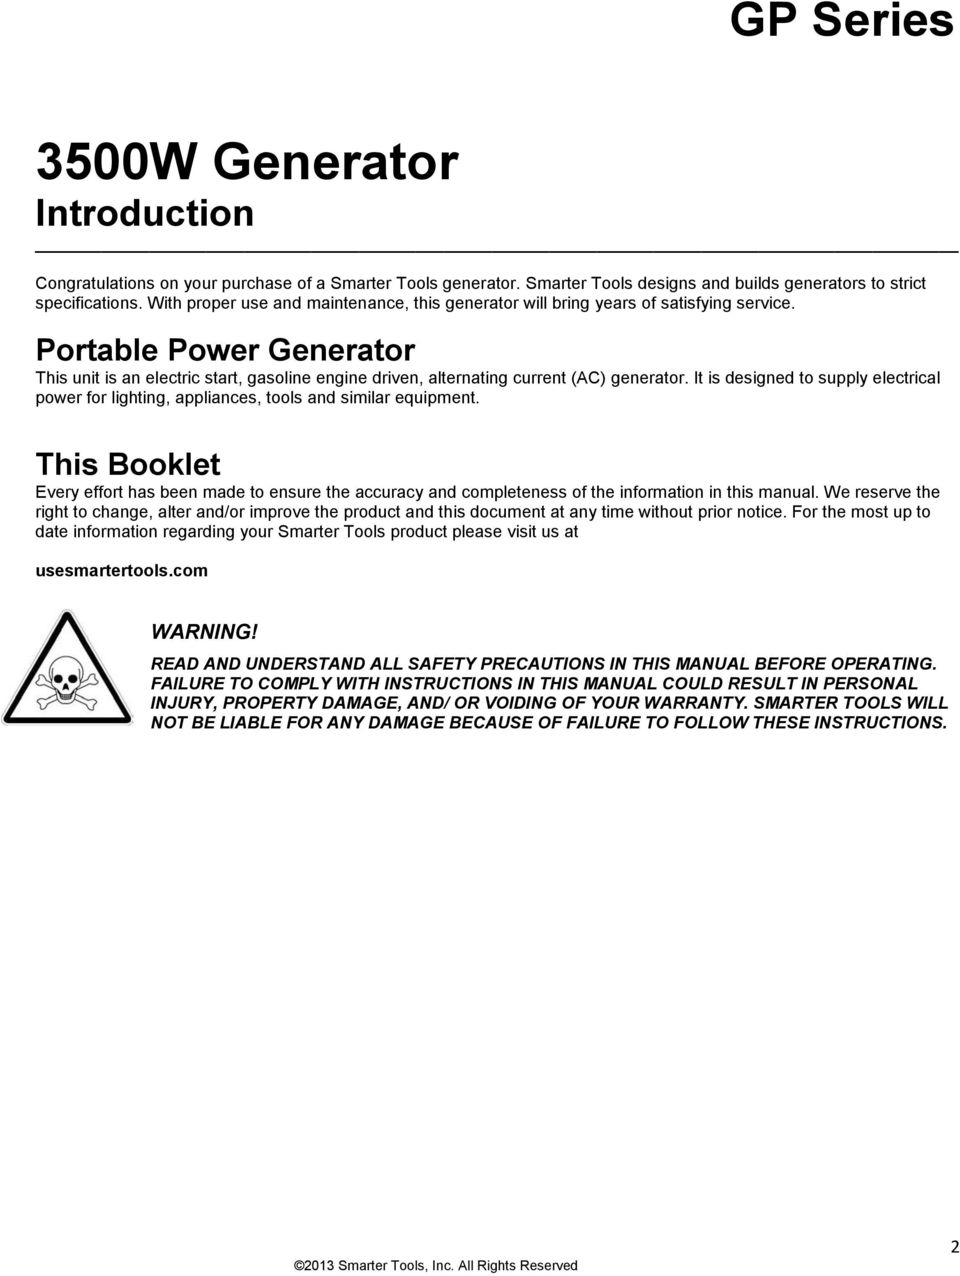 Portable Power Generator This unit is an electric start, gasoline engine driven, alternating current (AC) generator.